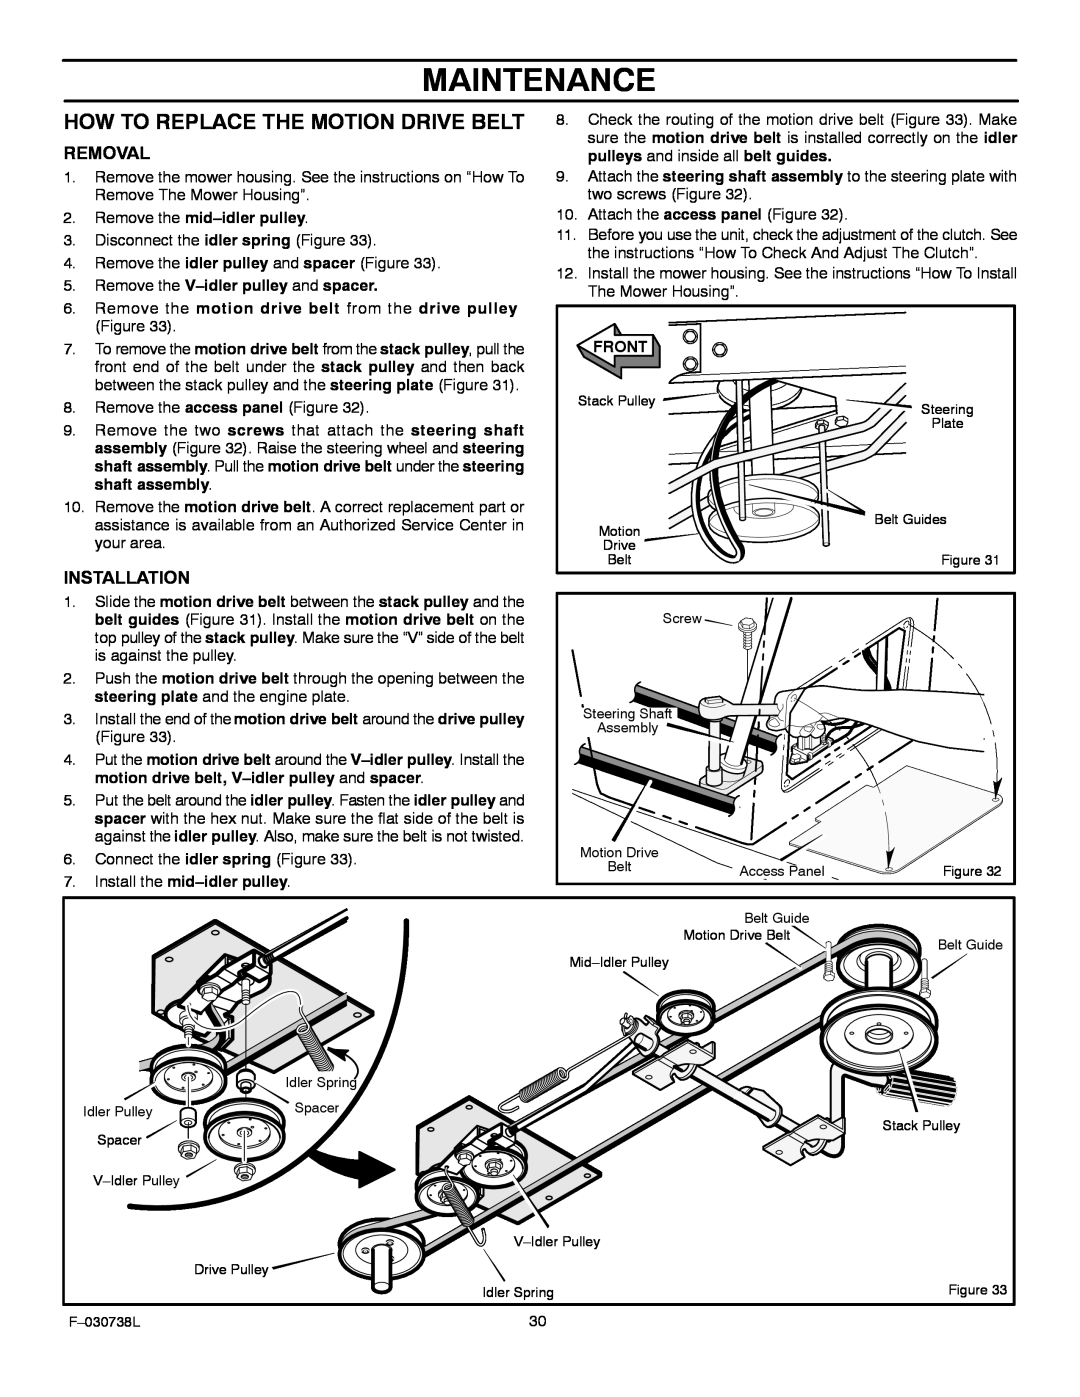 Murray 425603x99A manual Maintenance, How To Replace The Motion Drive Belt, Removal, Installation 